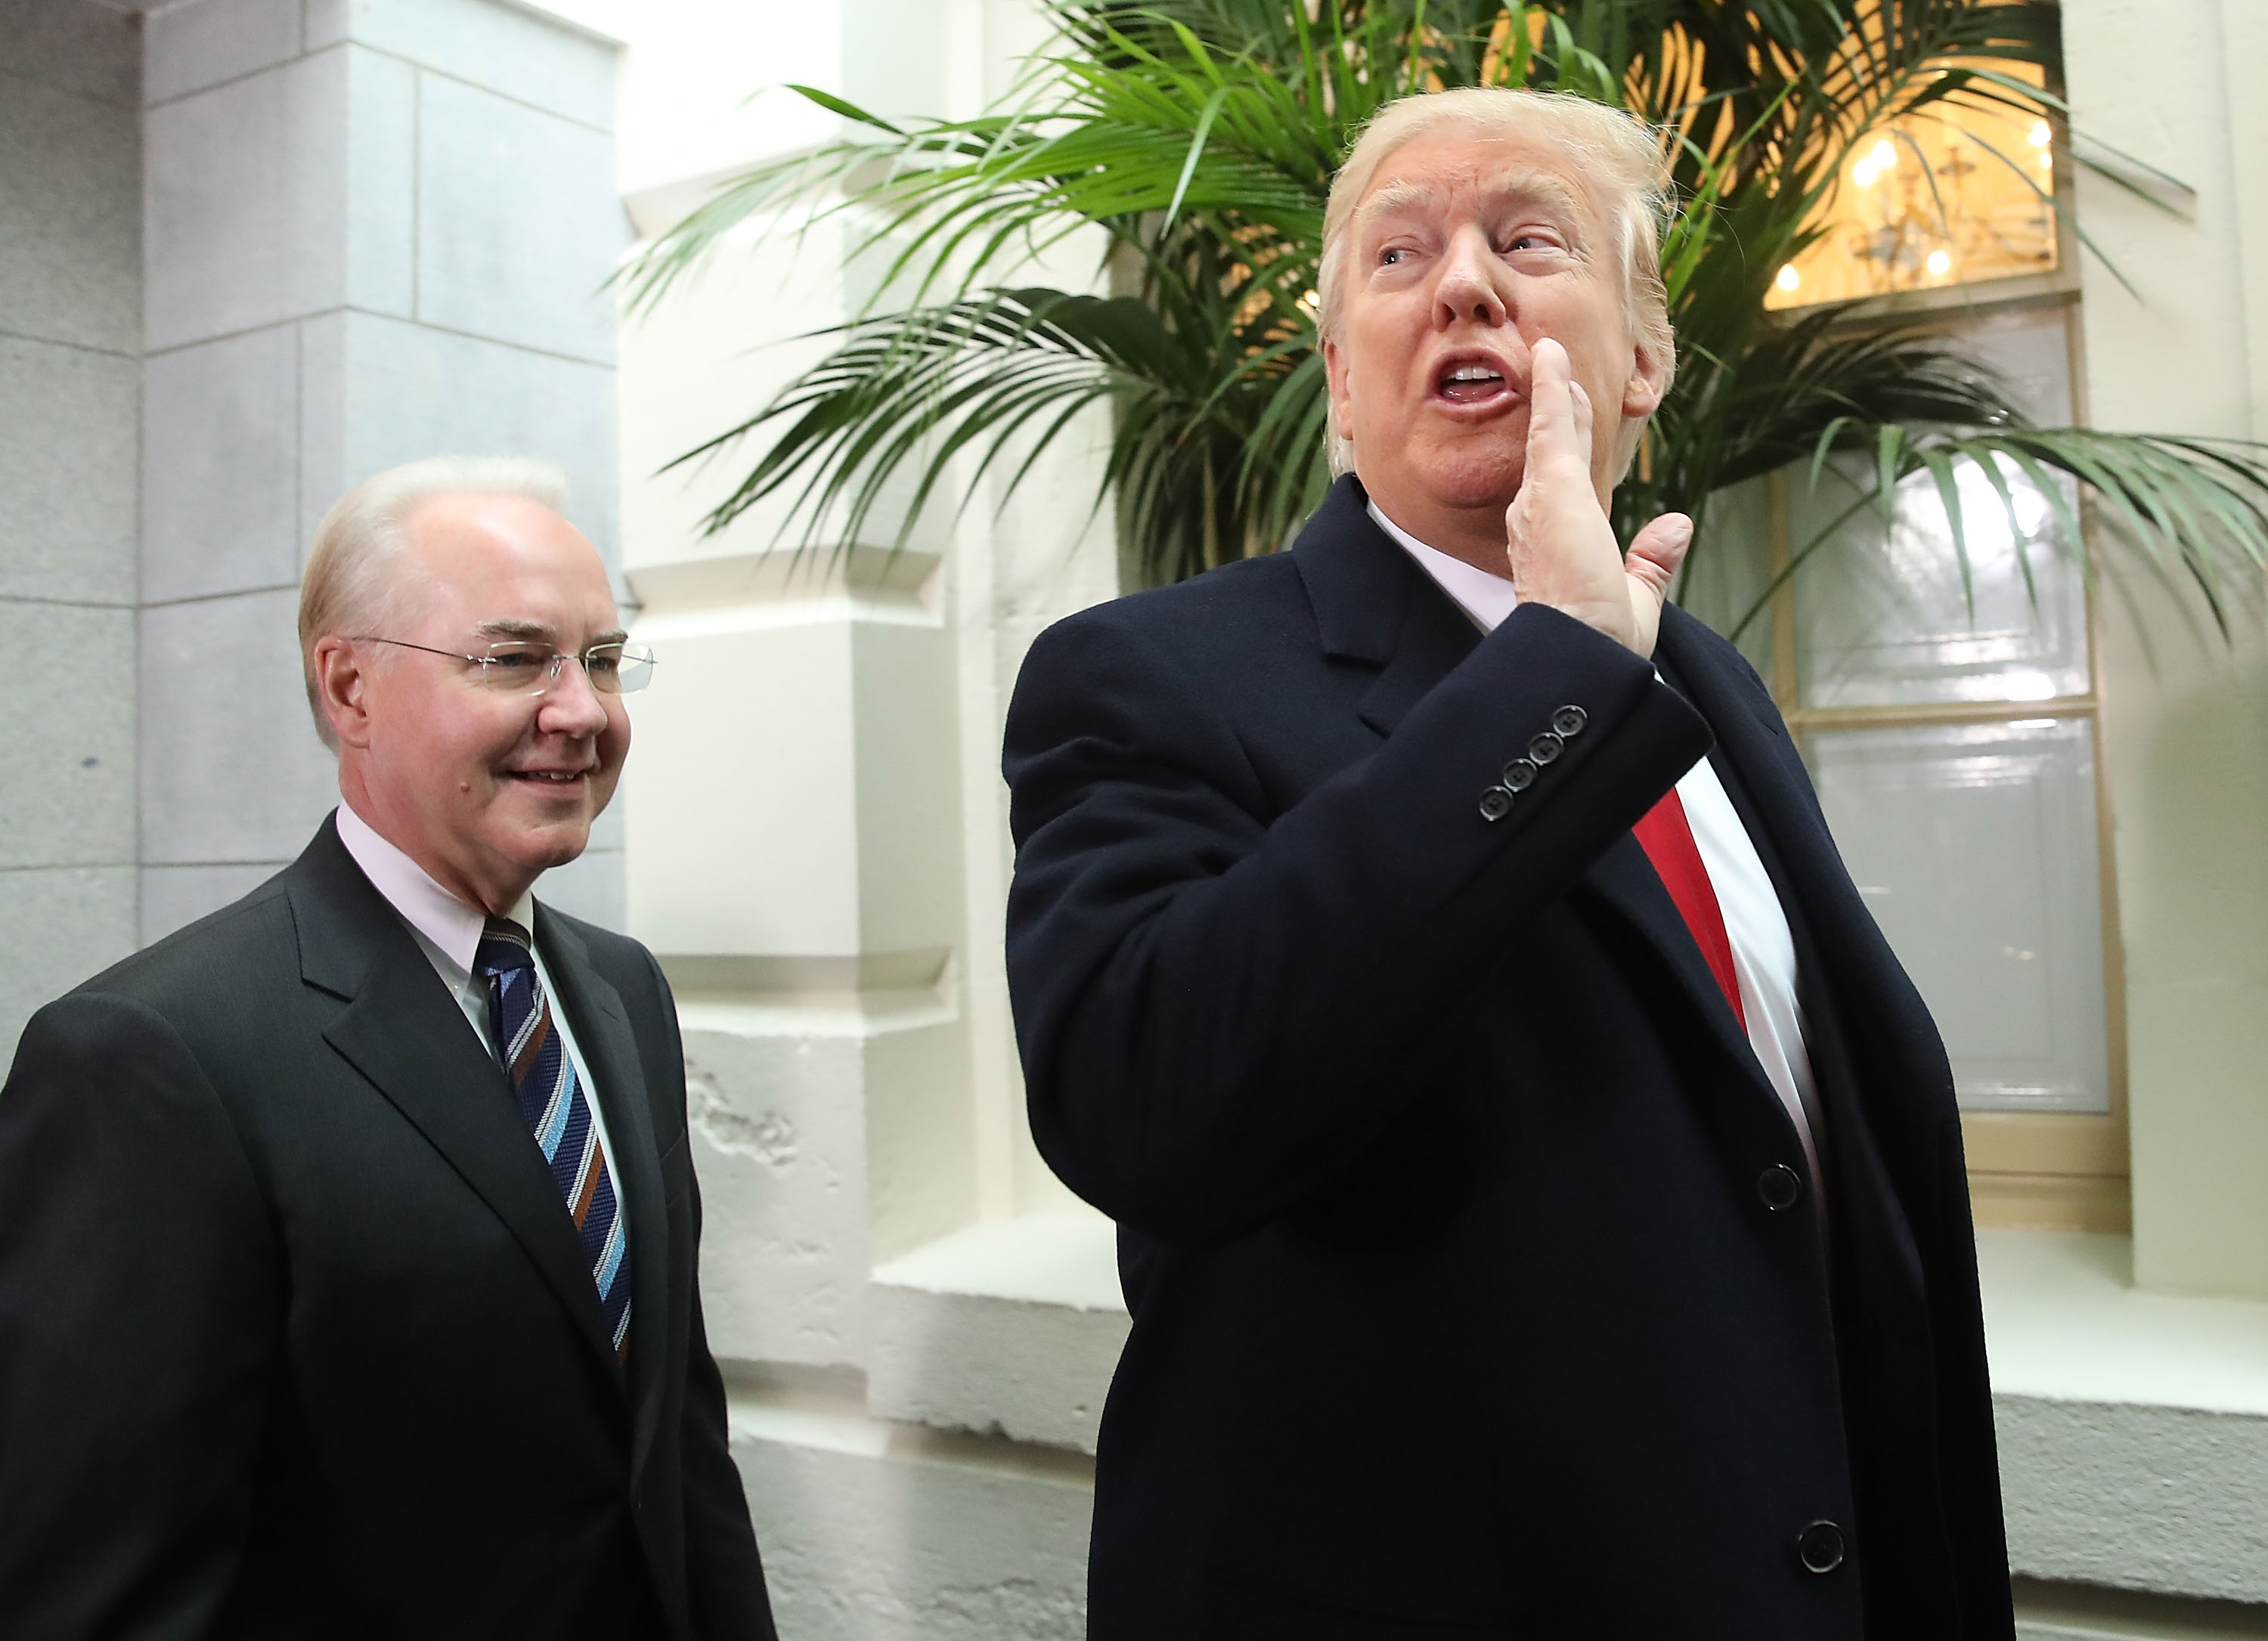 WASHINGTON, DC - MARCH 21: U.S. President Donald Trump and HHS Secretary Tom Price walk to a House Republican closed party conference on Capitol Hill, on March 21, 2017 in Washington, DC. President Trump is urging House Republicans to support his American Health Care Act. (Photo by Mark Wilson/Getty Images)